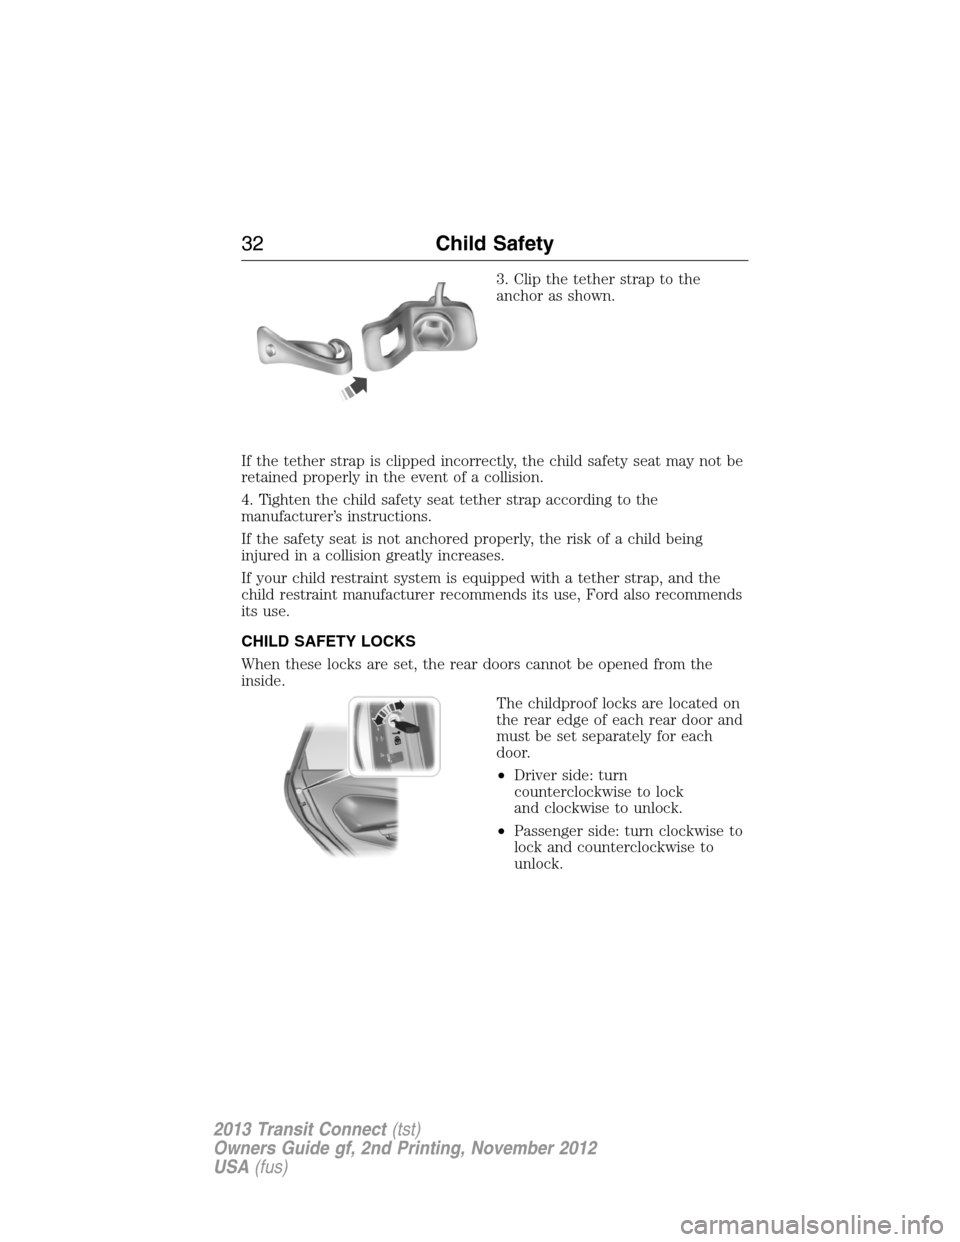 FORD TRANSIT CONNECT 2013 1.G Owners Manual 3. Clip the tether strap to the
anchor as shown.
If the tether strap is clipped incorrectly, the child safety seat may not be
retained properly in the event of a collision.
4. Tighten the child safety